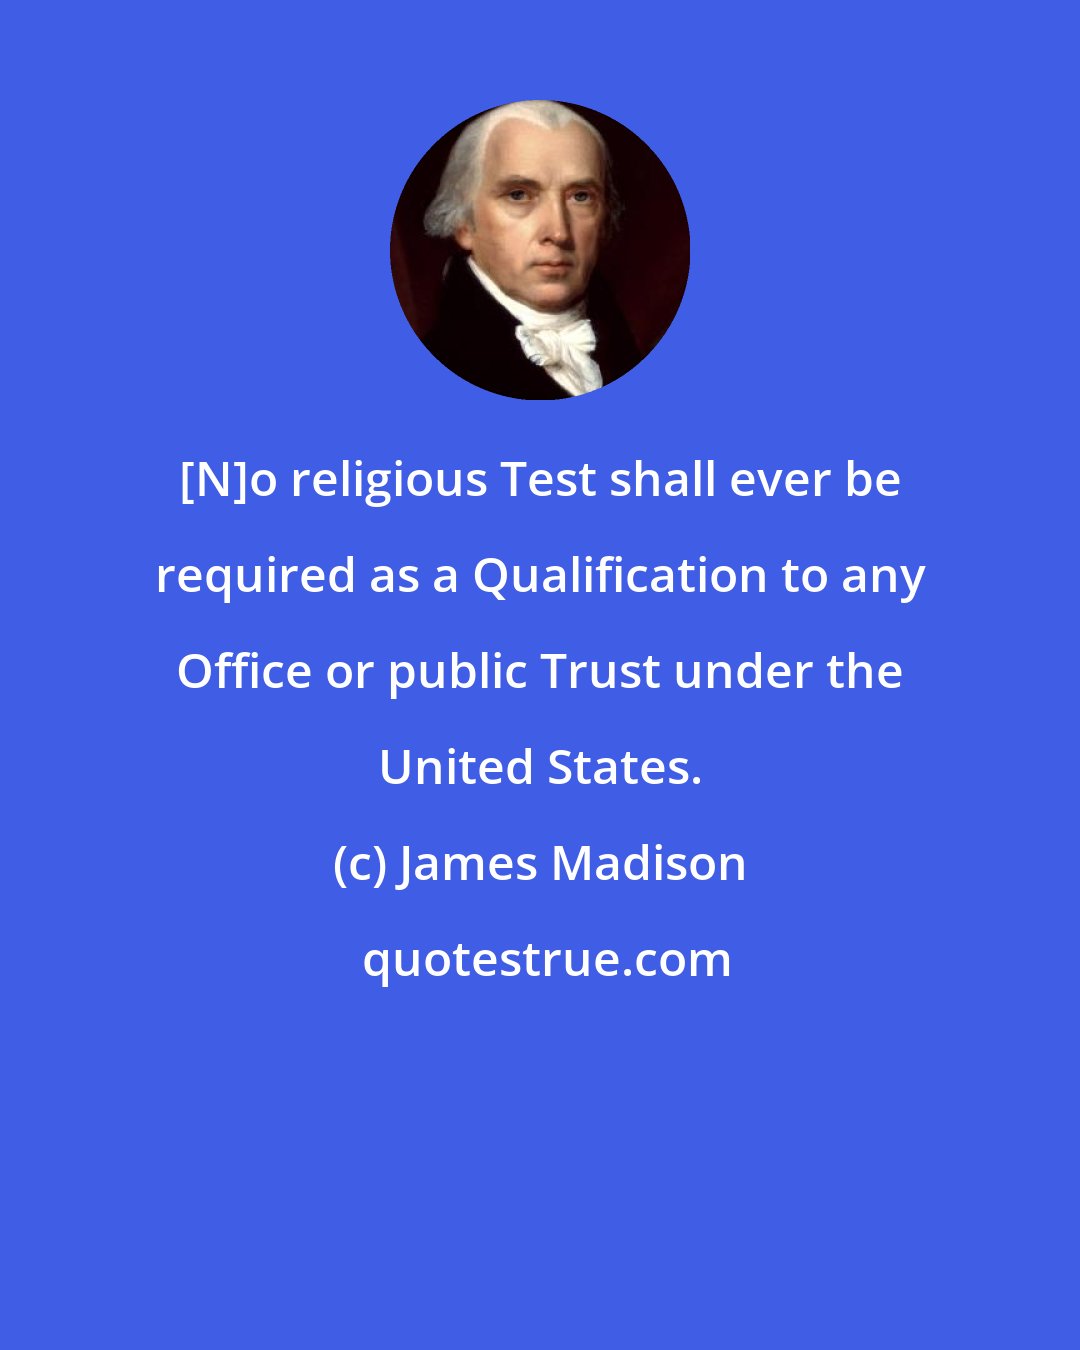 James Madison: [N]o religious Test shall ever be required as a Qualification to any Office or public Trust under the United States.